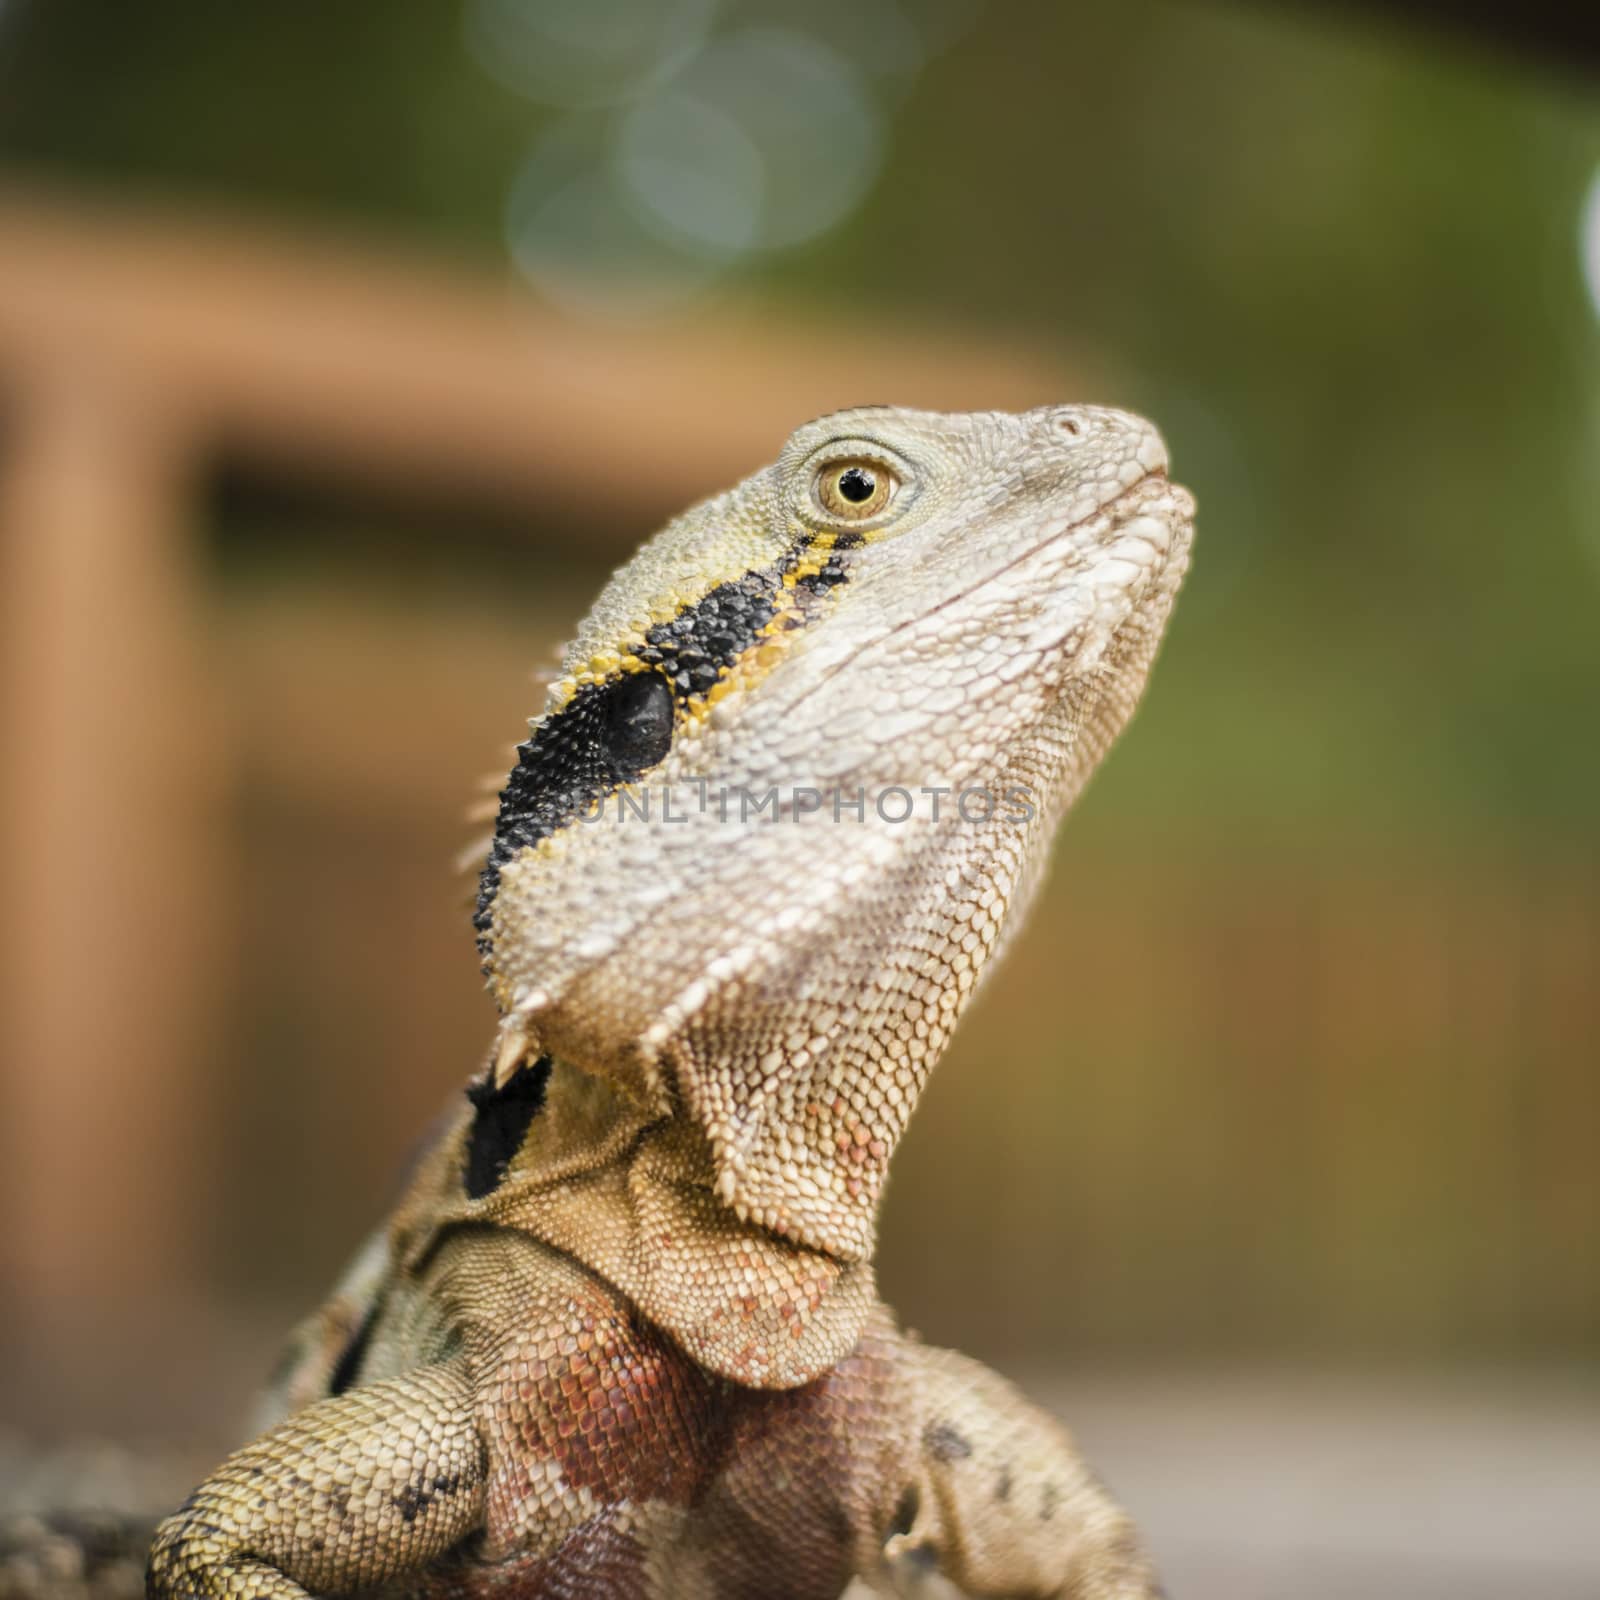 Water Dragon outside during the day. by artistrobd